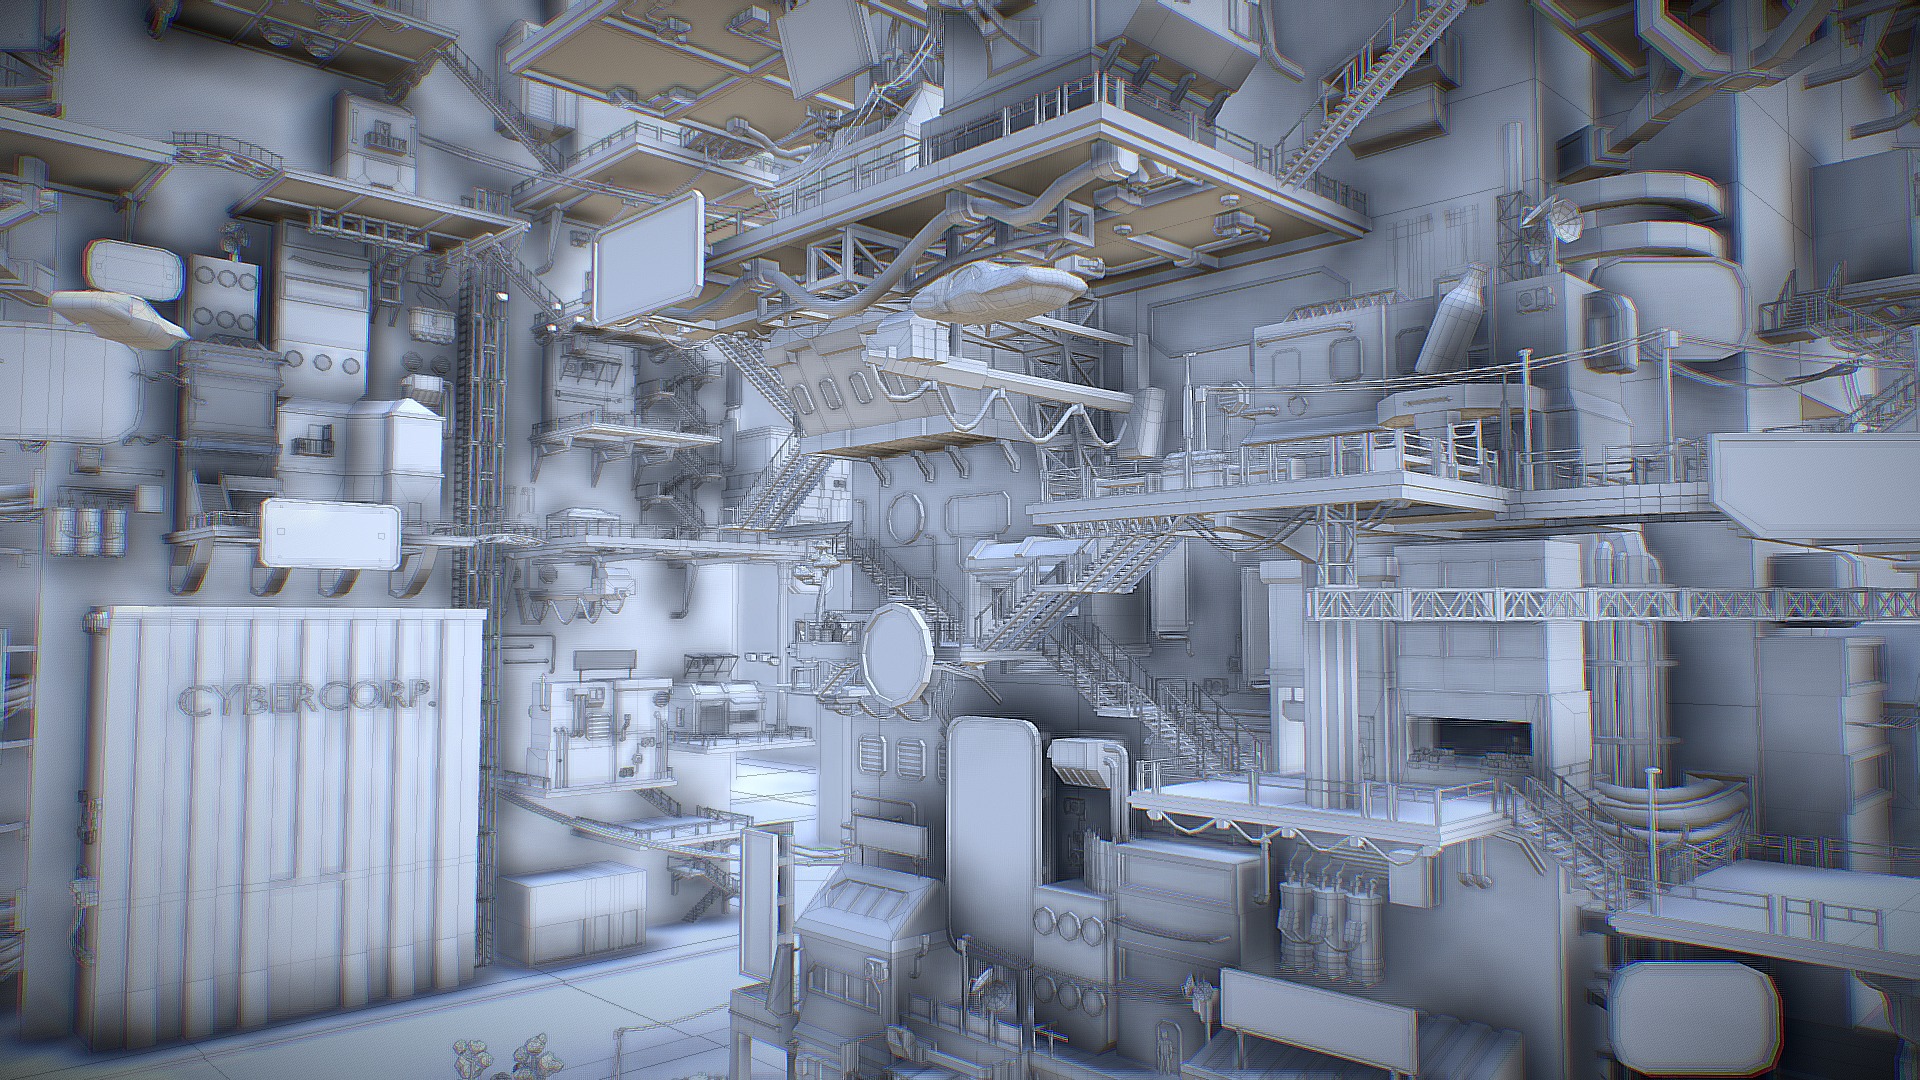 3D model Cyberpunk City (two Year Old Project) - This is a 3D model of the Cyberpunk City (two Year Old Project). The 3D model is about a large room with many white containers.